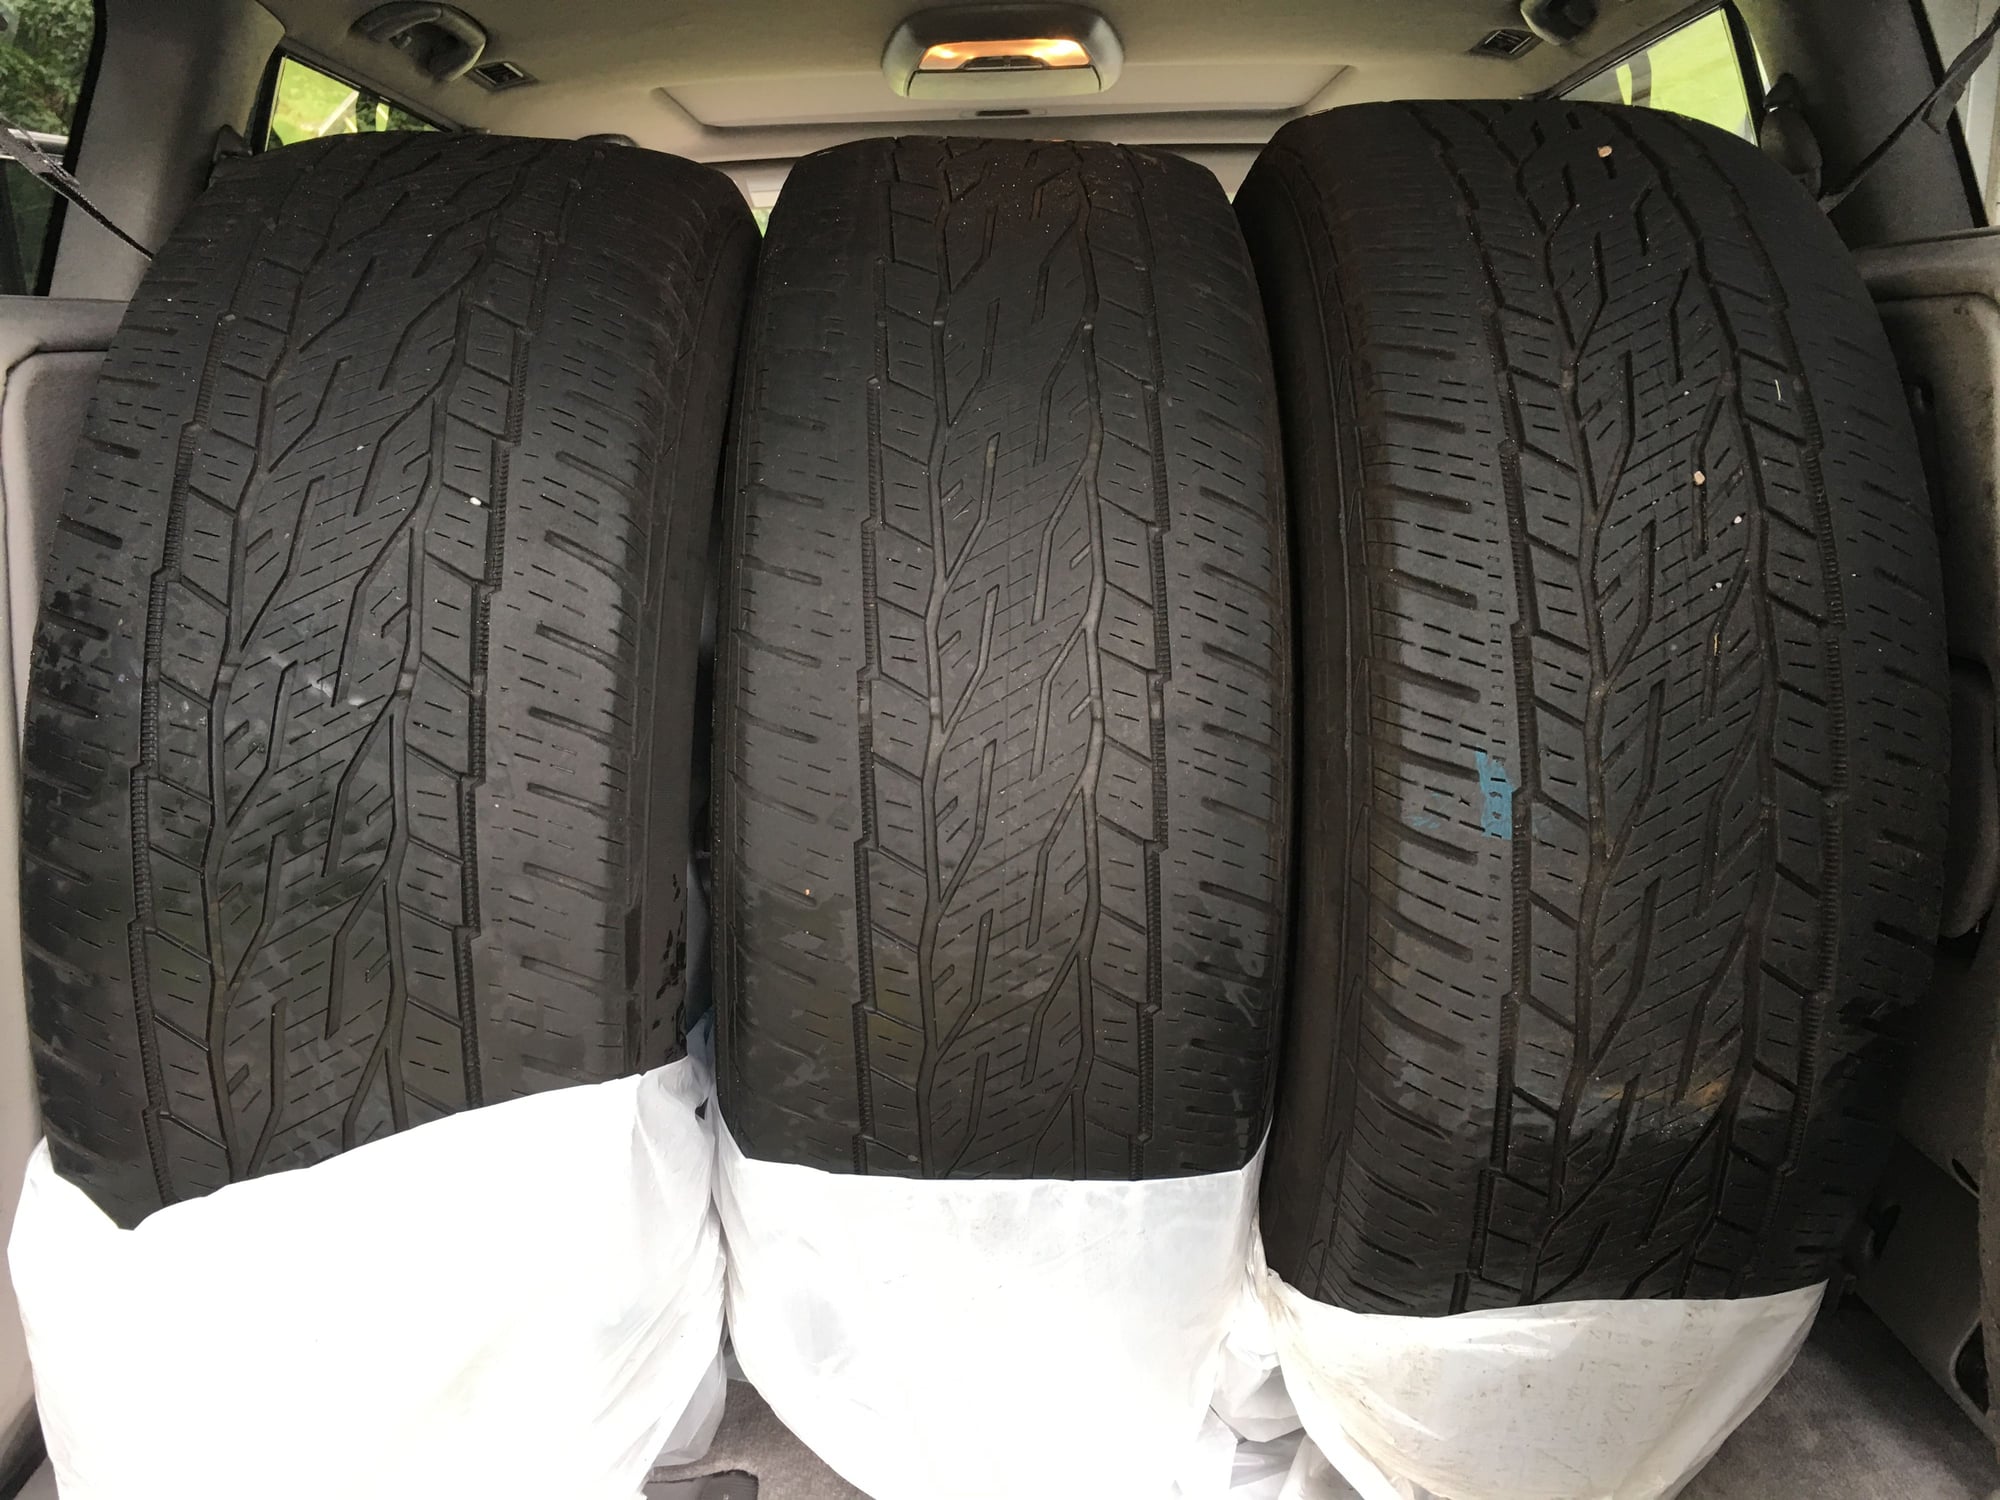 Wheels and Tires/Axles - (PA) Set of 4 Land Cruiser Wheels and Tires - $400 OBO - Used - 1998 to 2007 Toyota Land Cruiser - Philadelphia, PA 19103, United States